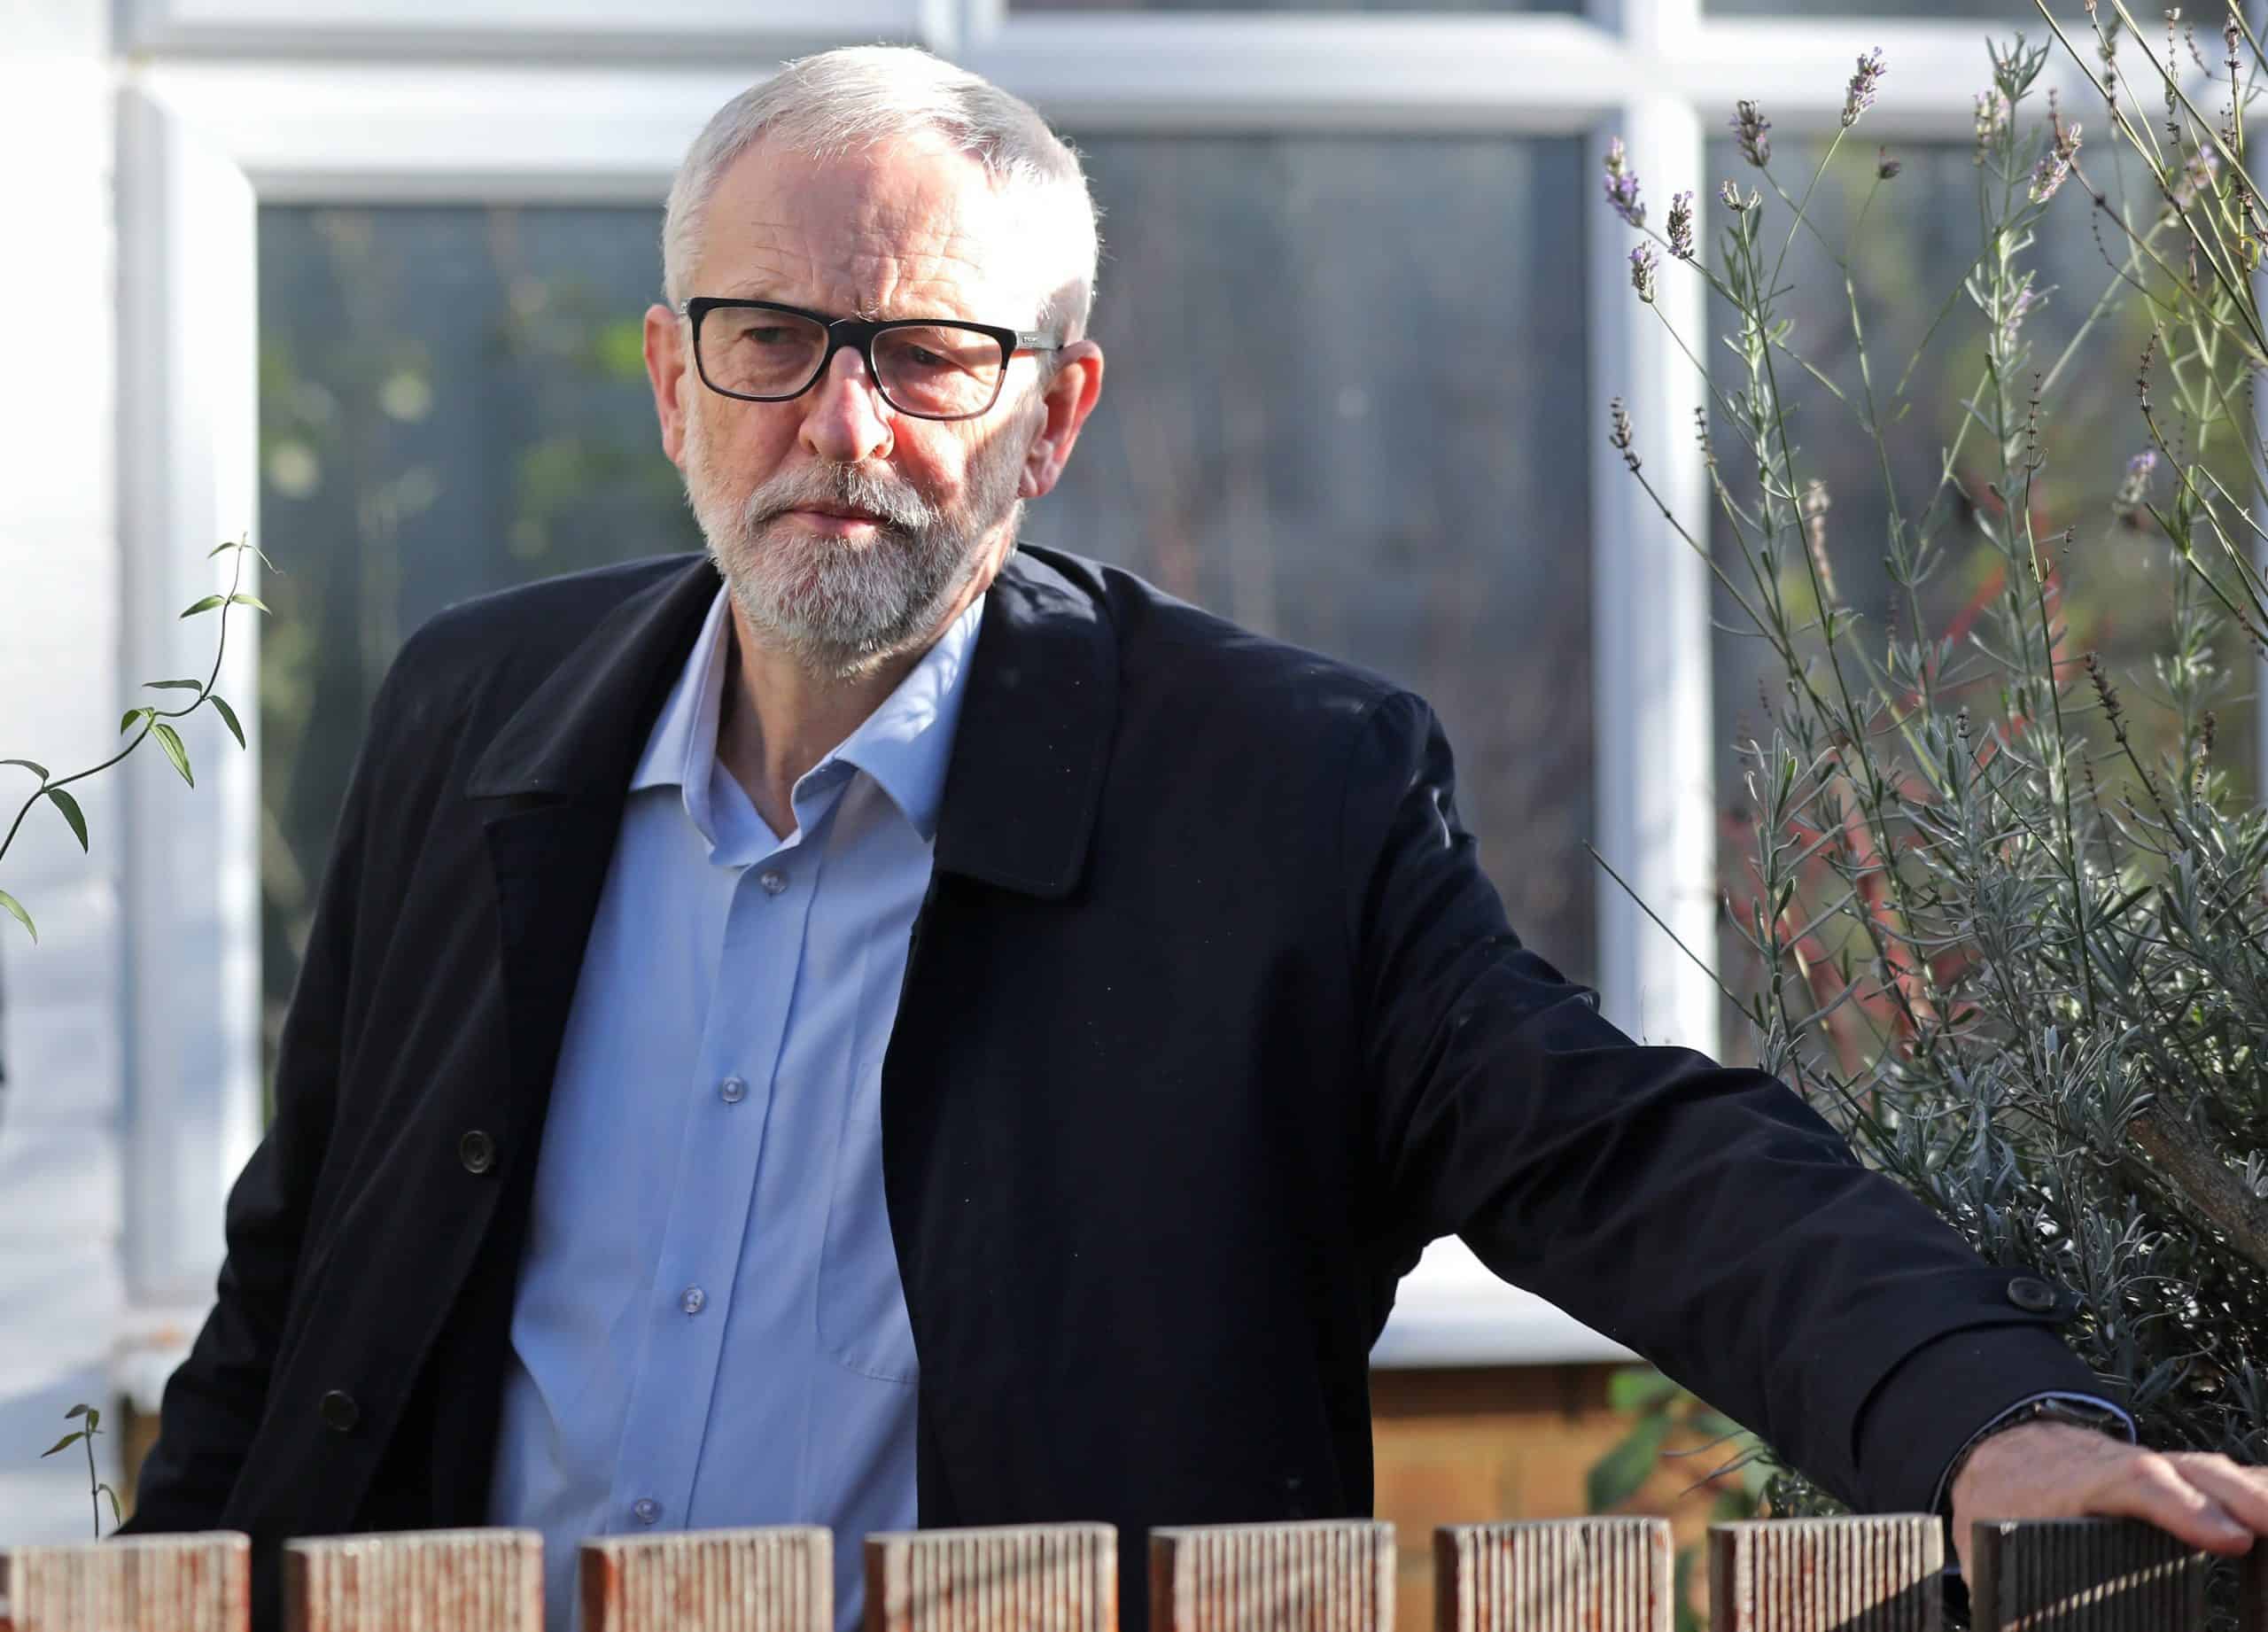 Corbyn vows to fight back as reaction to his suspension unfolds